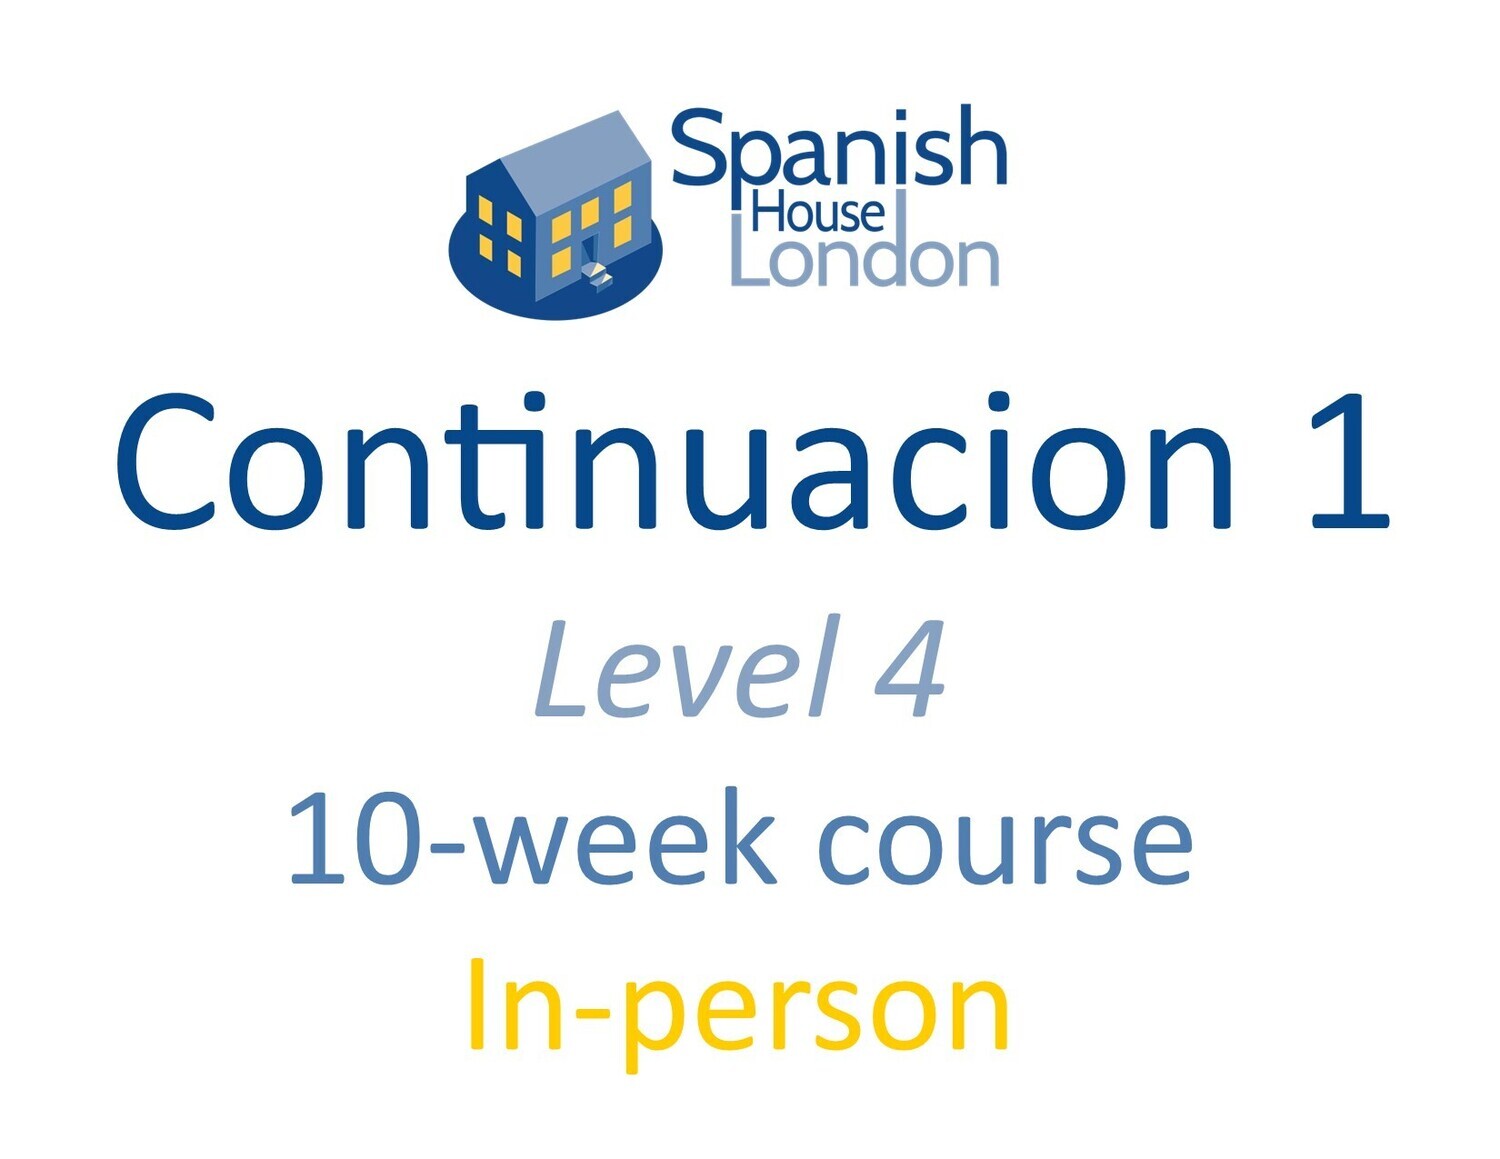 Continuacion 1 Course starting on 6th June at 12pm in Clapham North